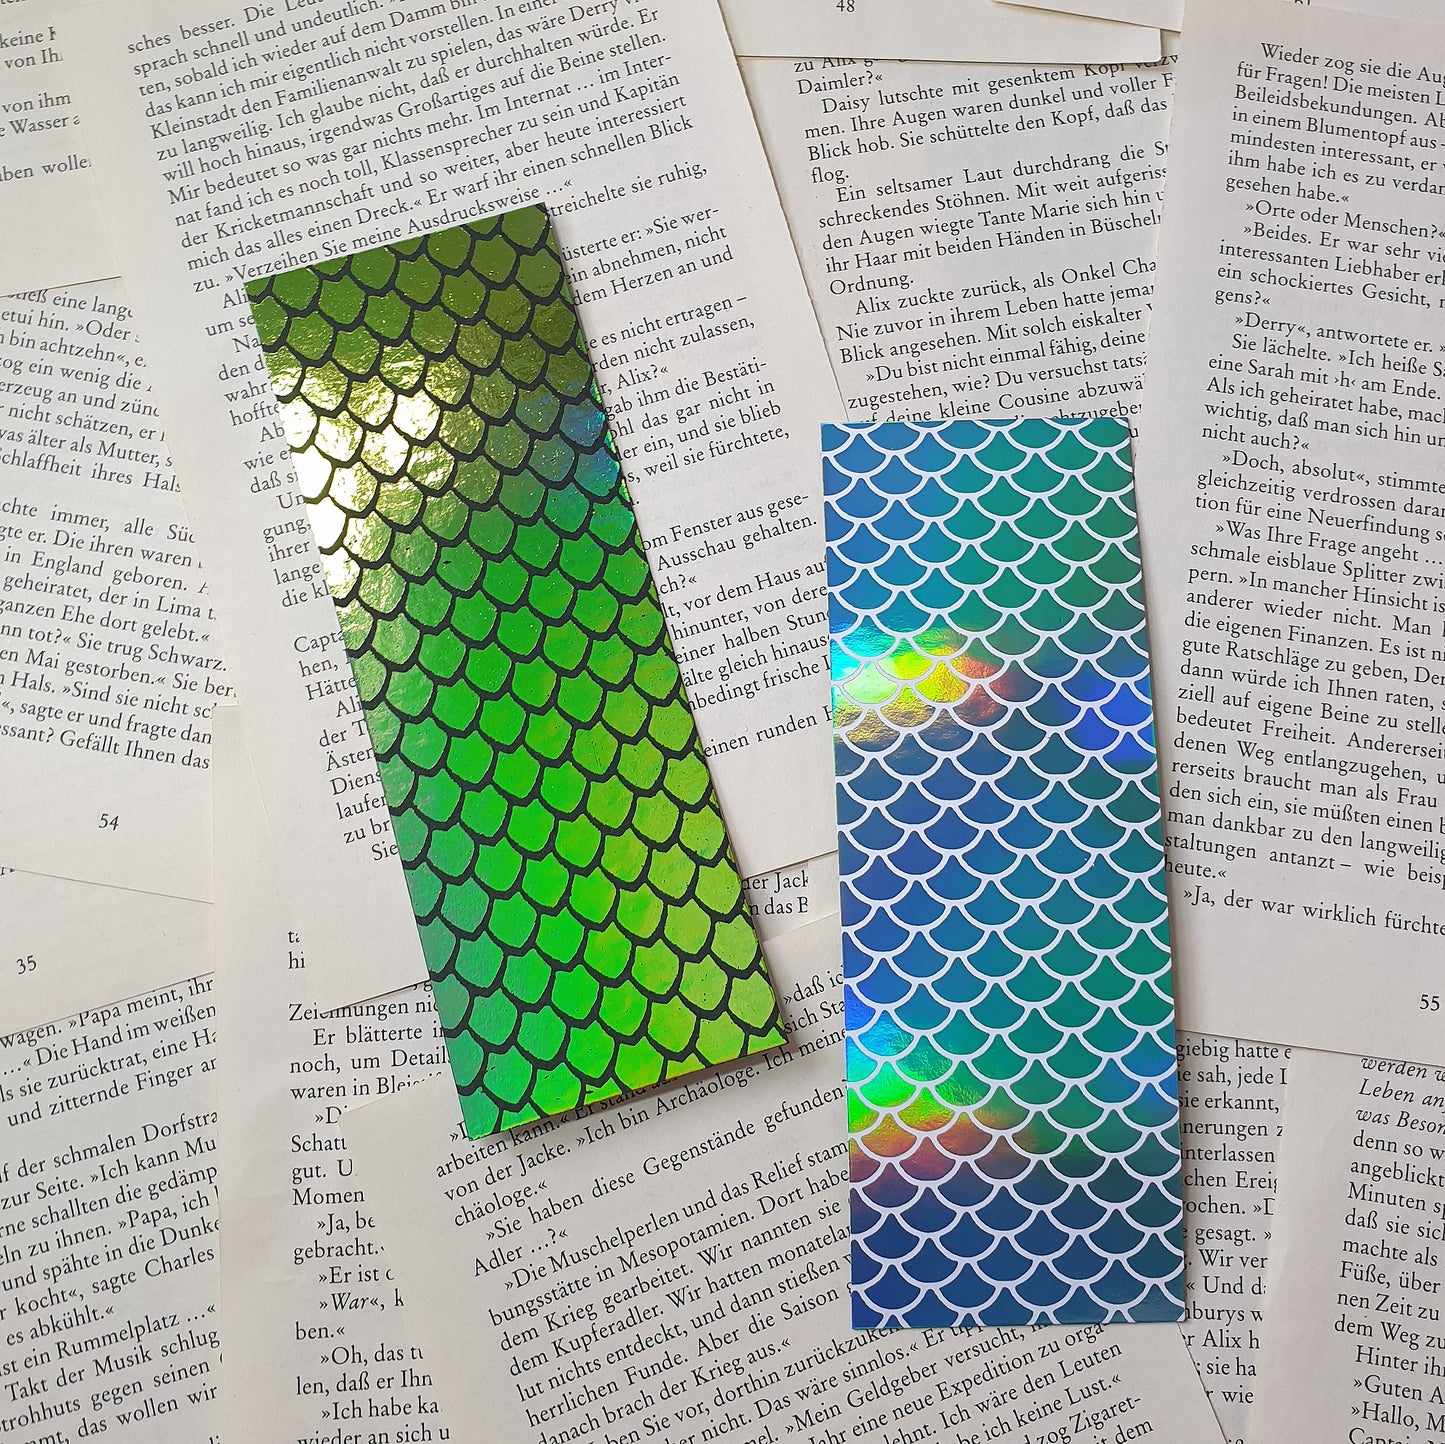 Foiled Dragon Scales/ Mermaid Scales Bookmark